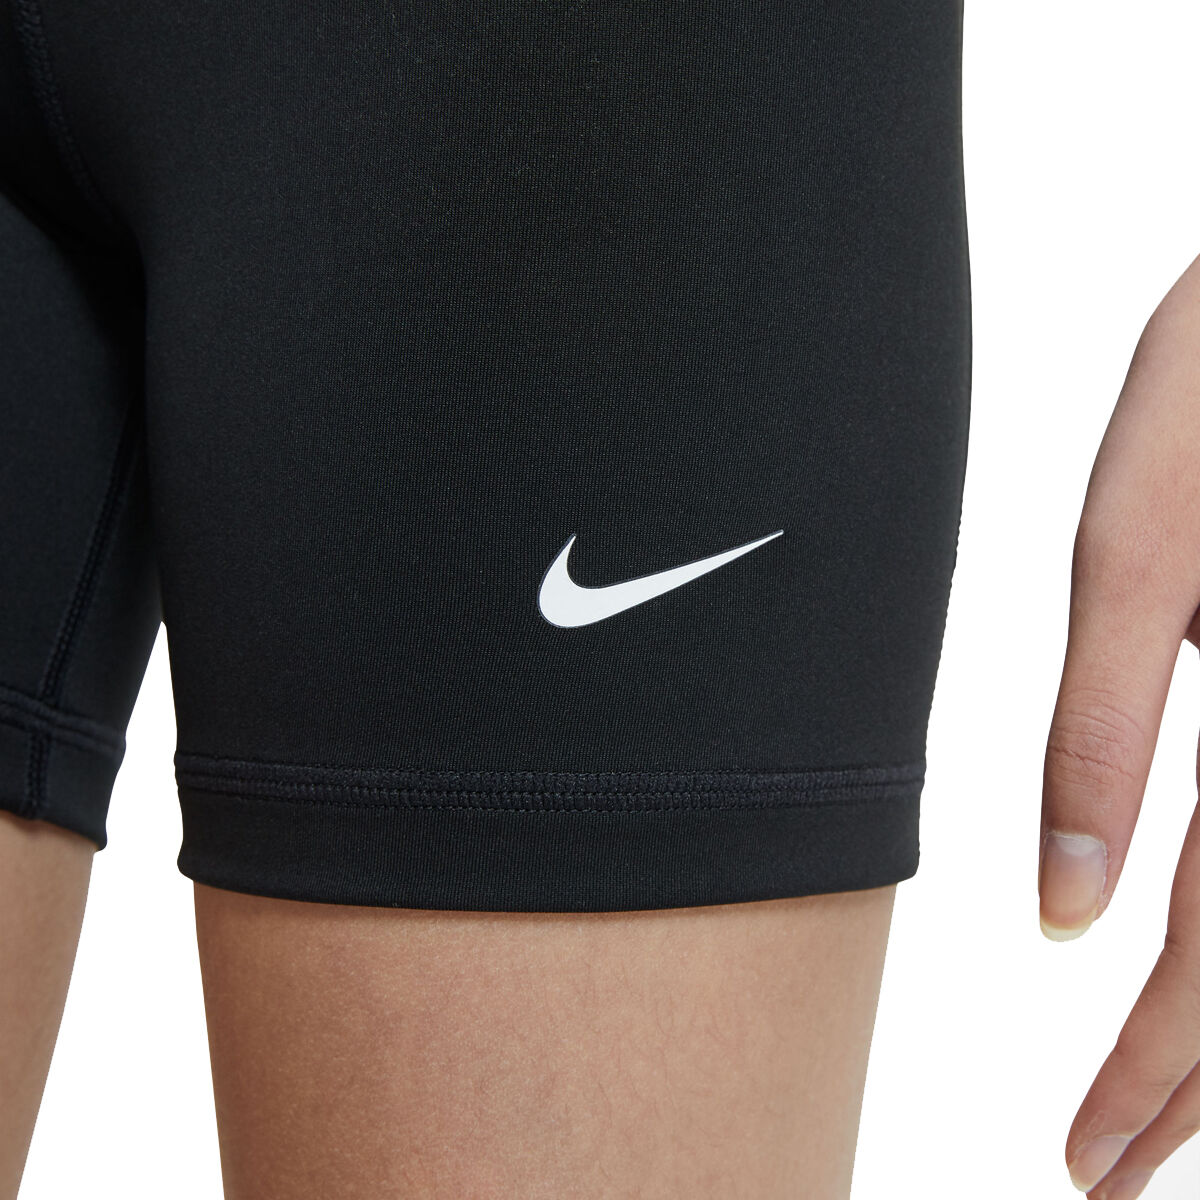  Black Volleyball Shorts For Teen Girls 12-13